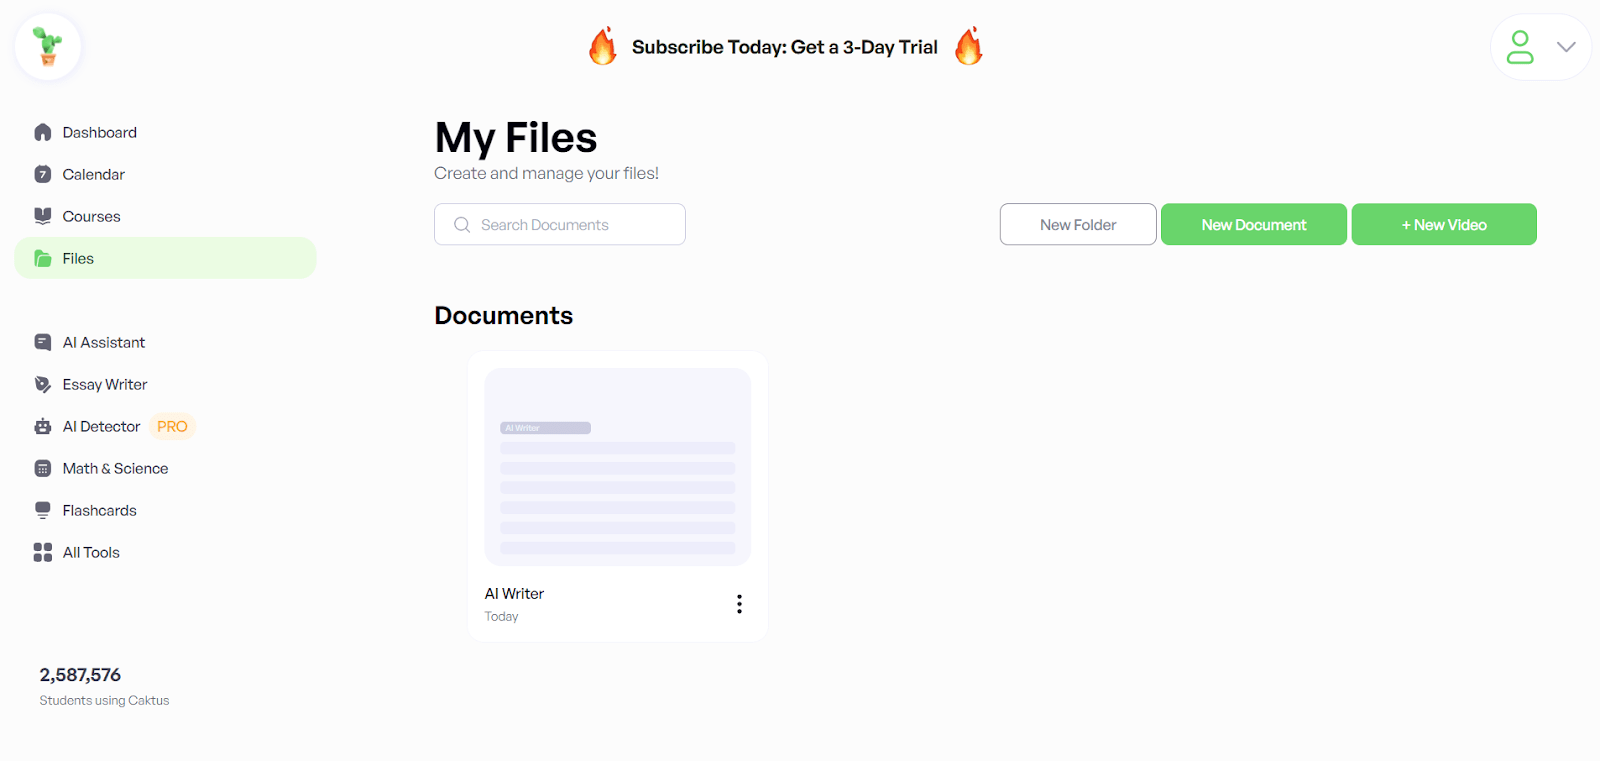 Name your file and start writing